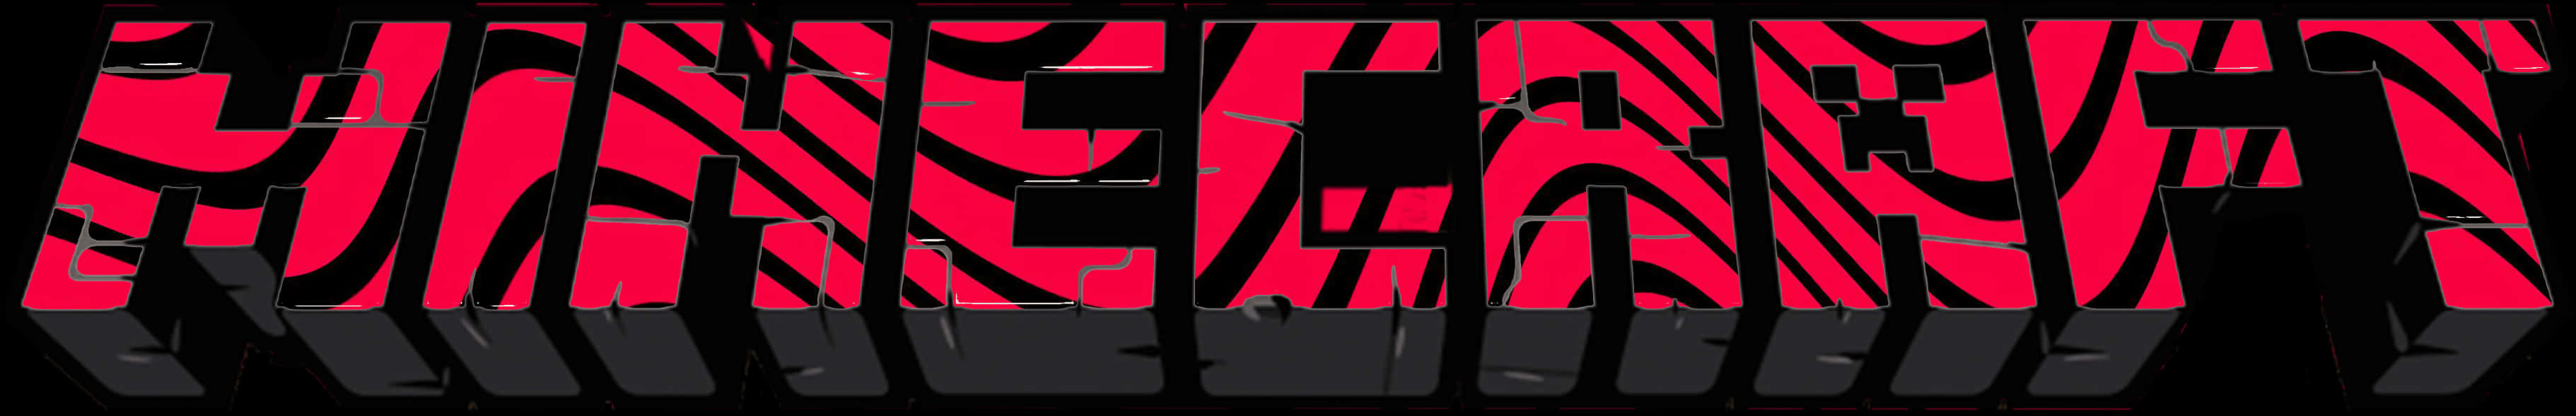 Minecraft Logo Distorted Red Black PNG